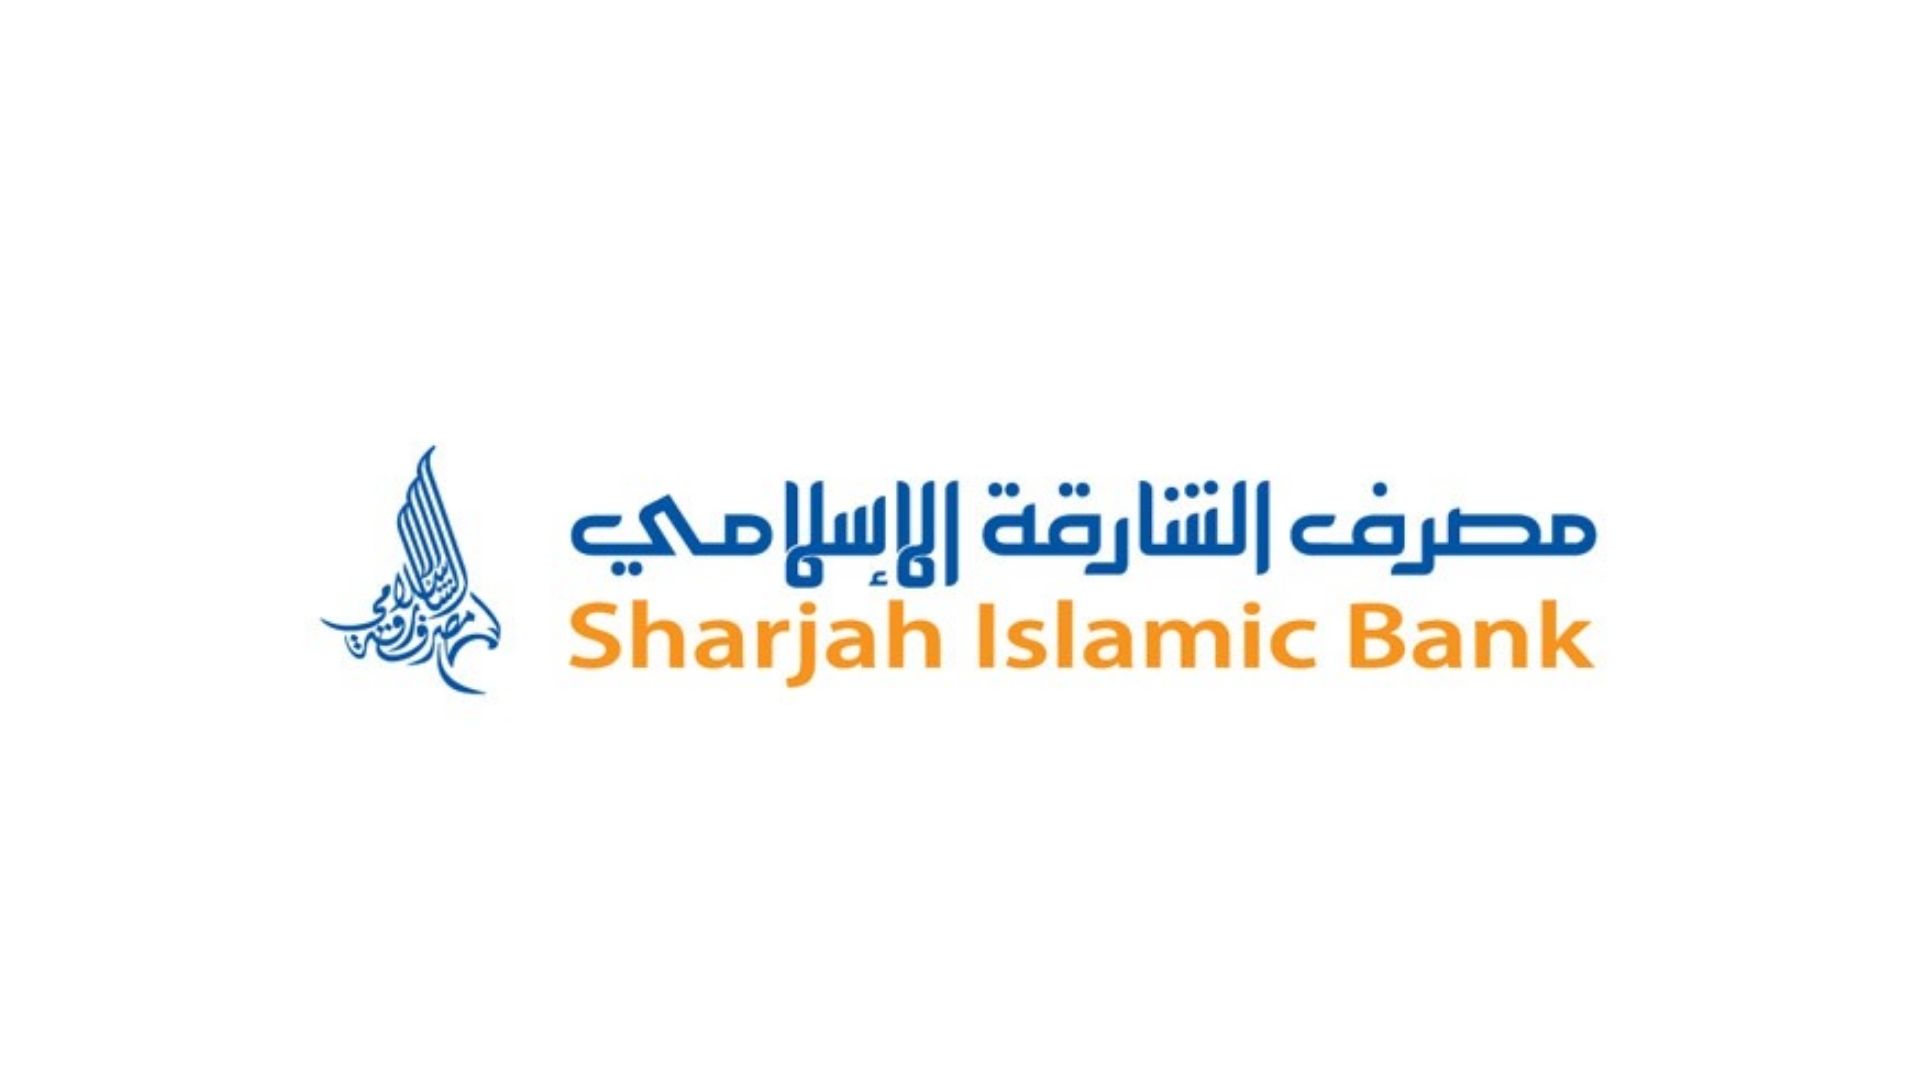 Owner of Sharjah Islamic Bank-Wiki and Logo